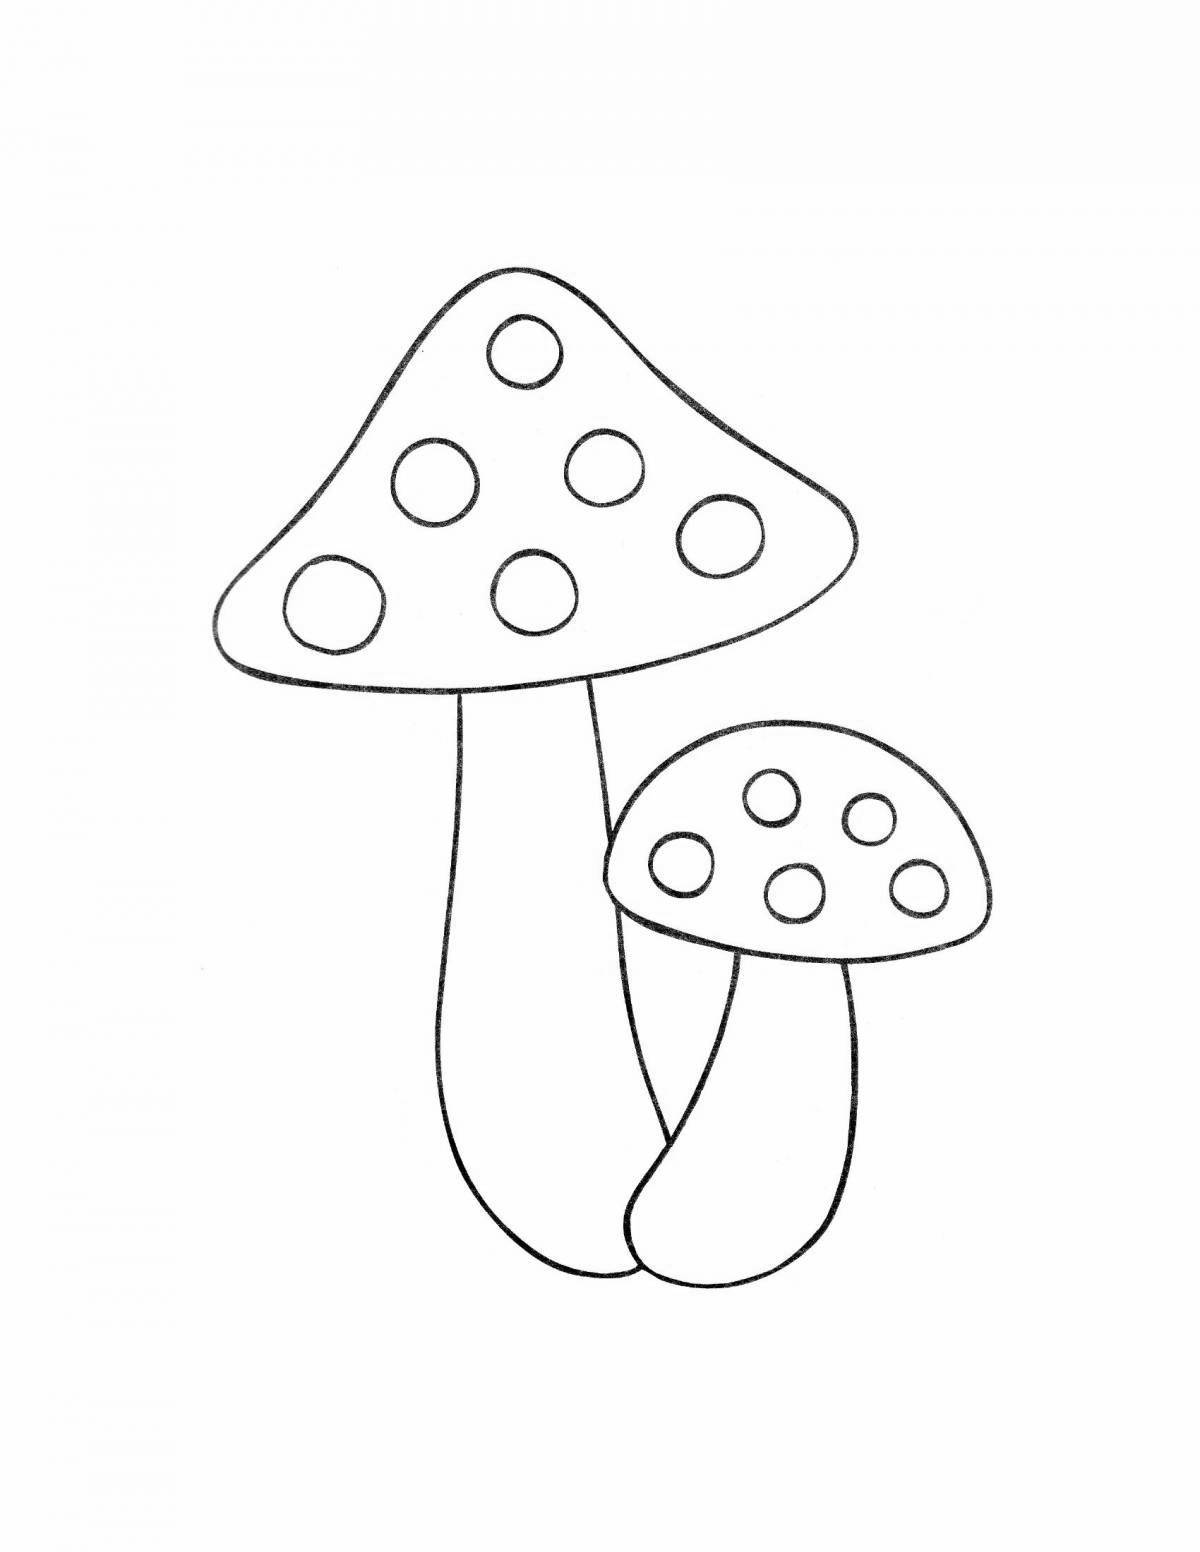 Drawing of a glowing mushroom fly agaric